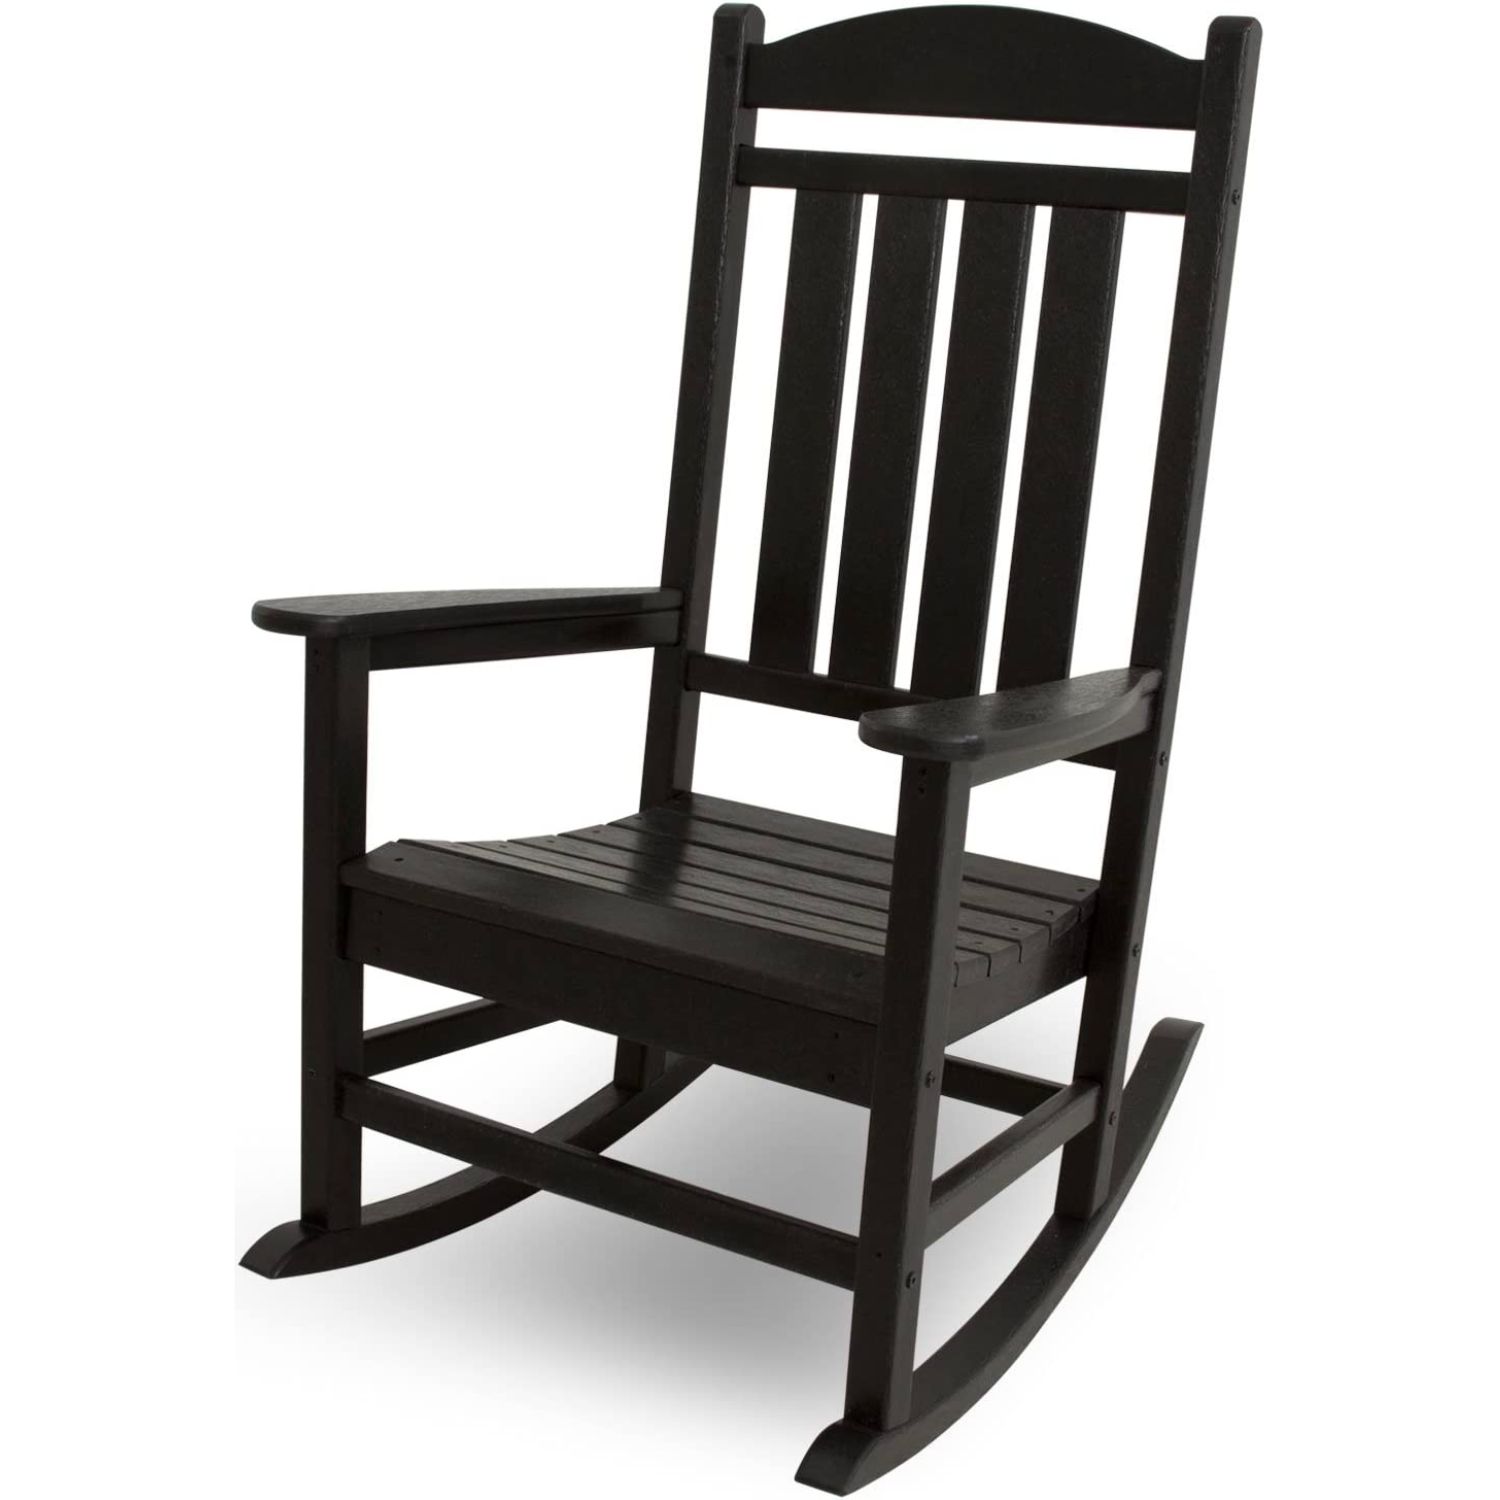 The Best Fire Pit Chairs Option: Rocking Chair